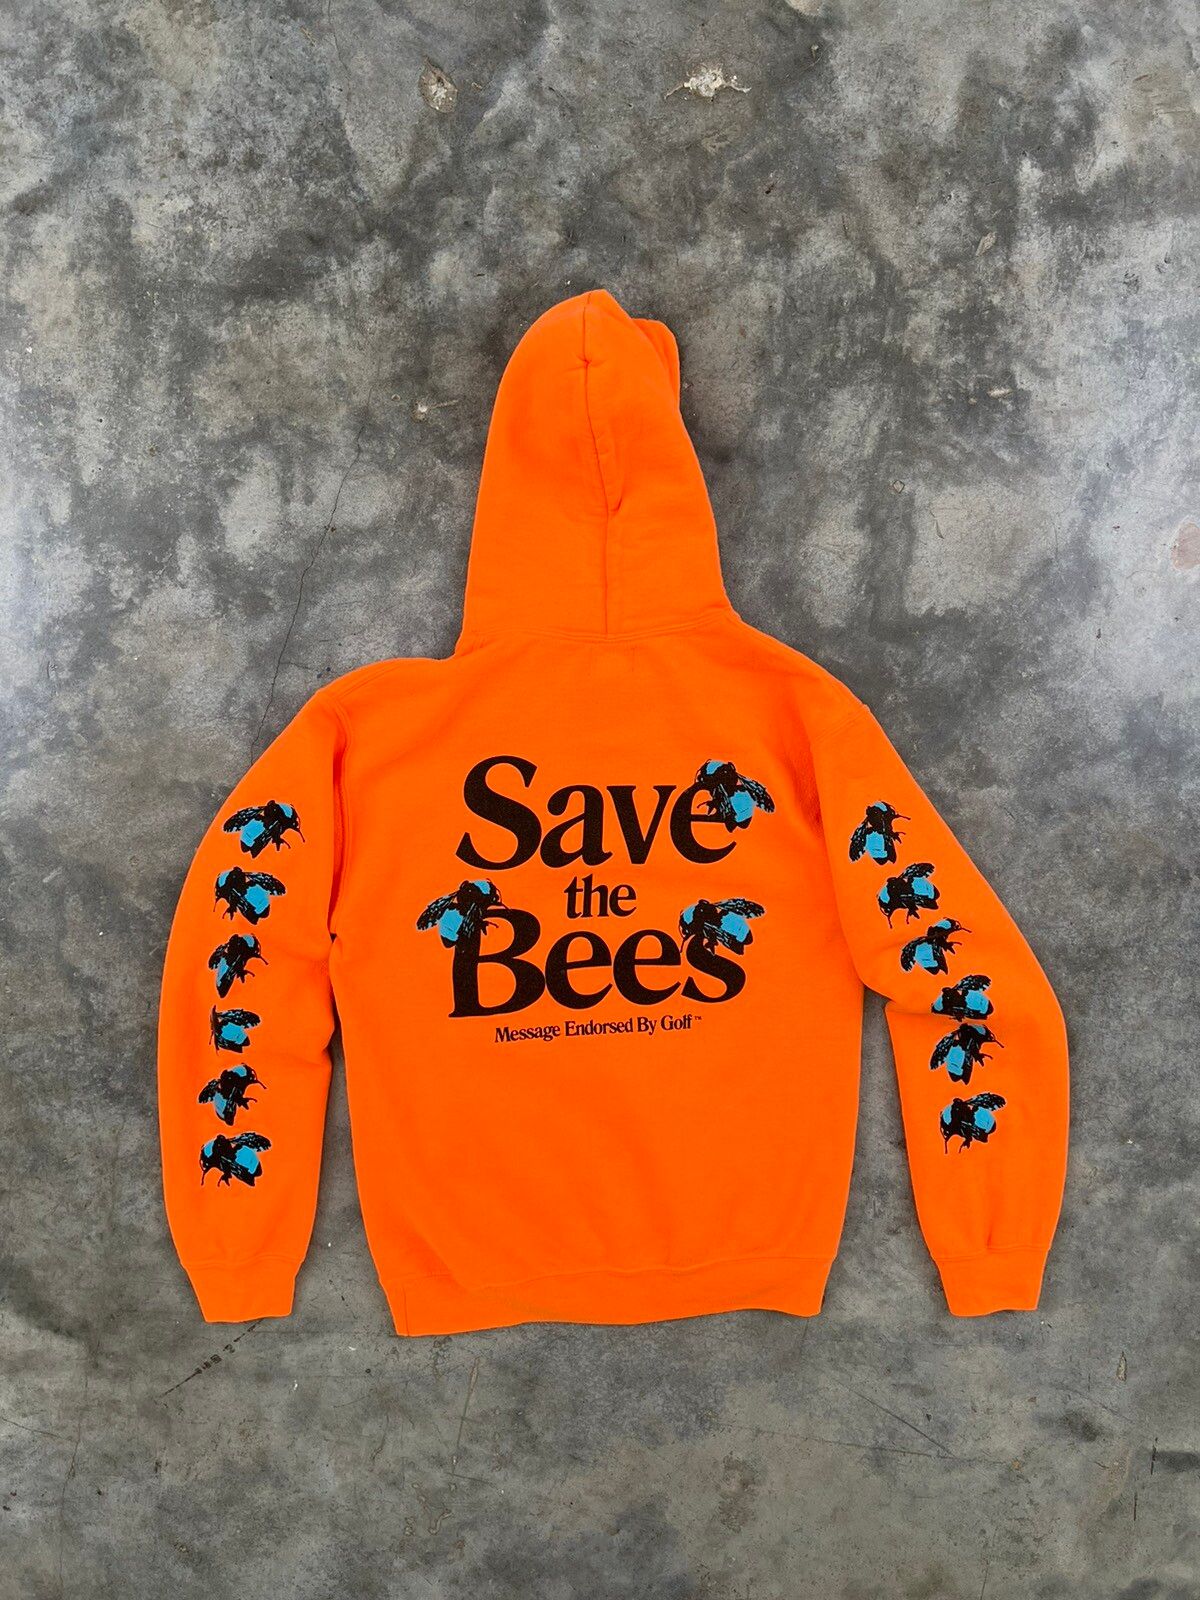 Golf Wang Golf Wang Save The Bees Neon Orange Hoodie Sz. Small Size US S / EU 44-46 / 1 - 1 Preview